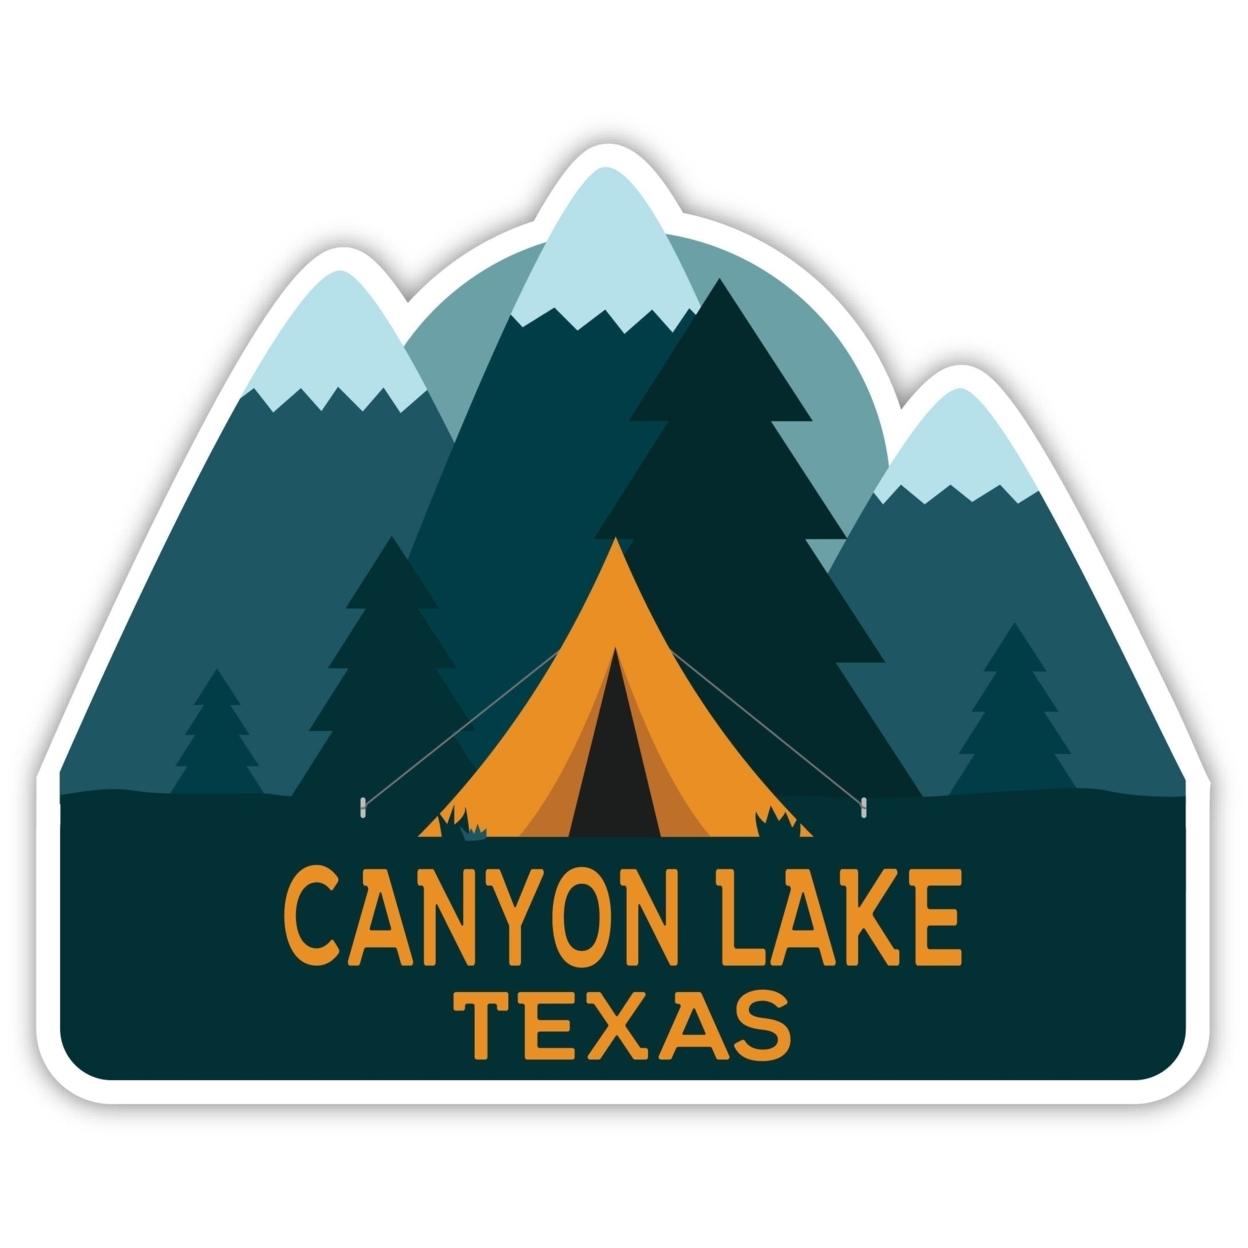 Canyon Lake Texas Souvenir Decorative Stickers (Choose Theme And Size) - 4-Pack, 4-Inch, Adventures Awaits